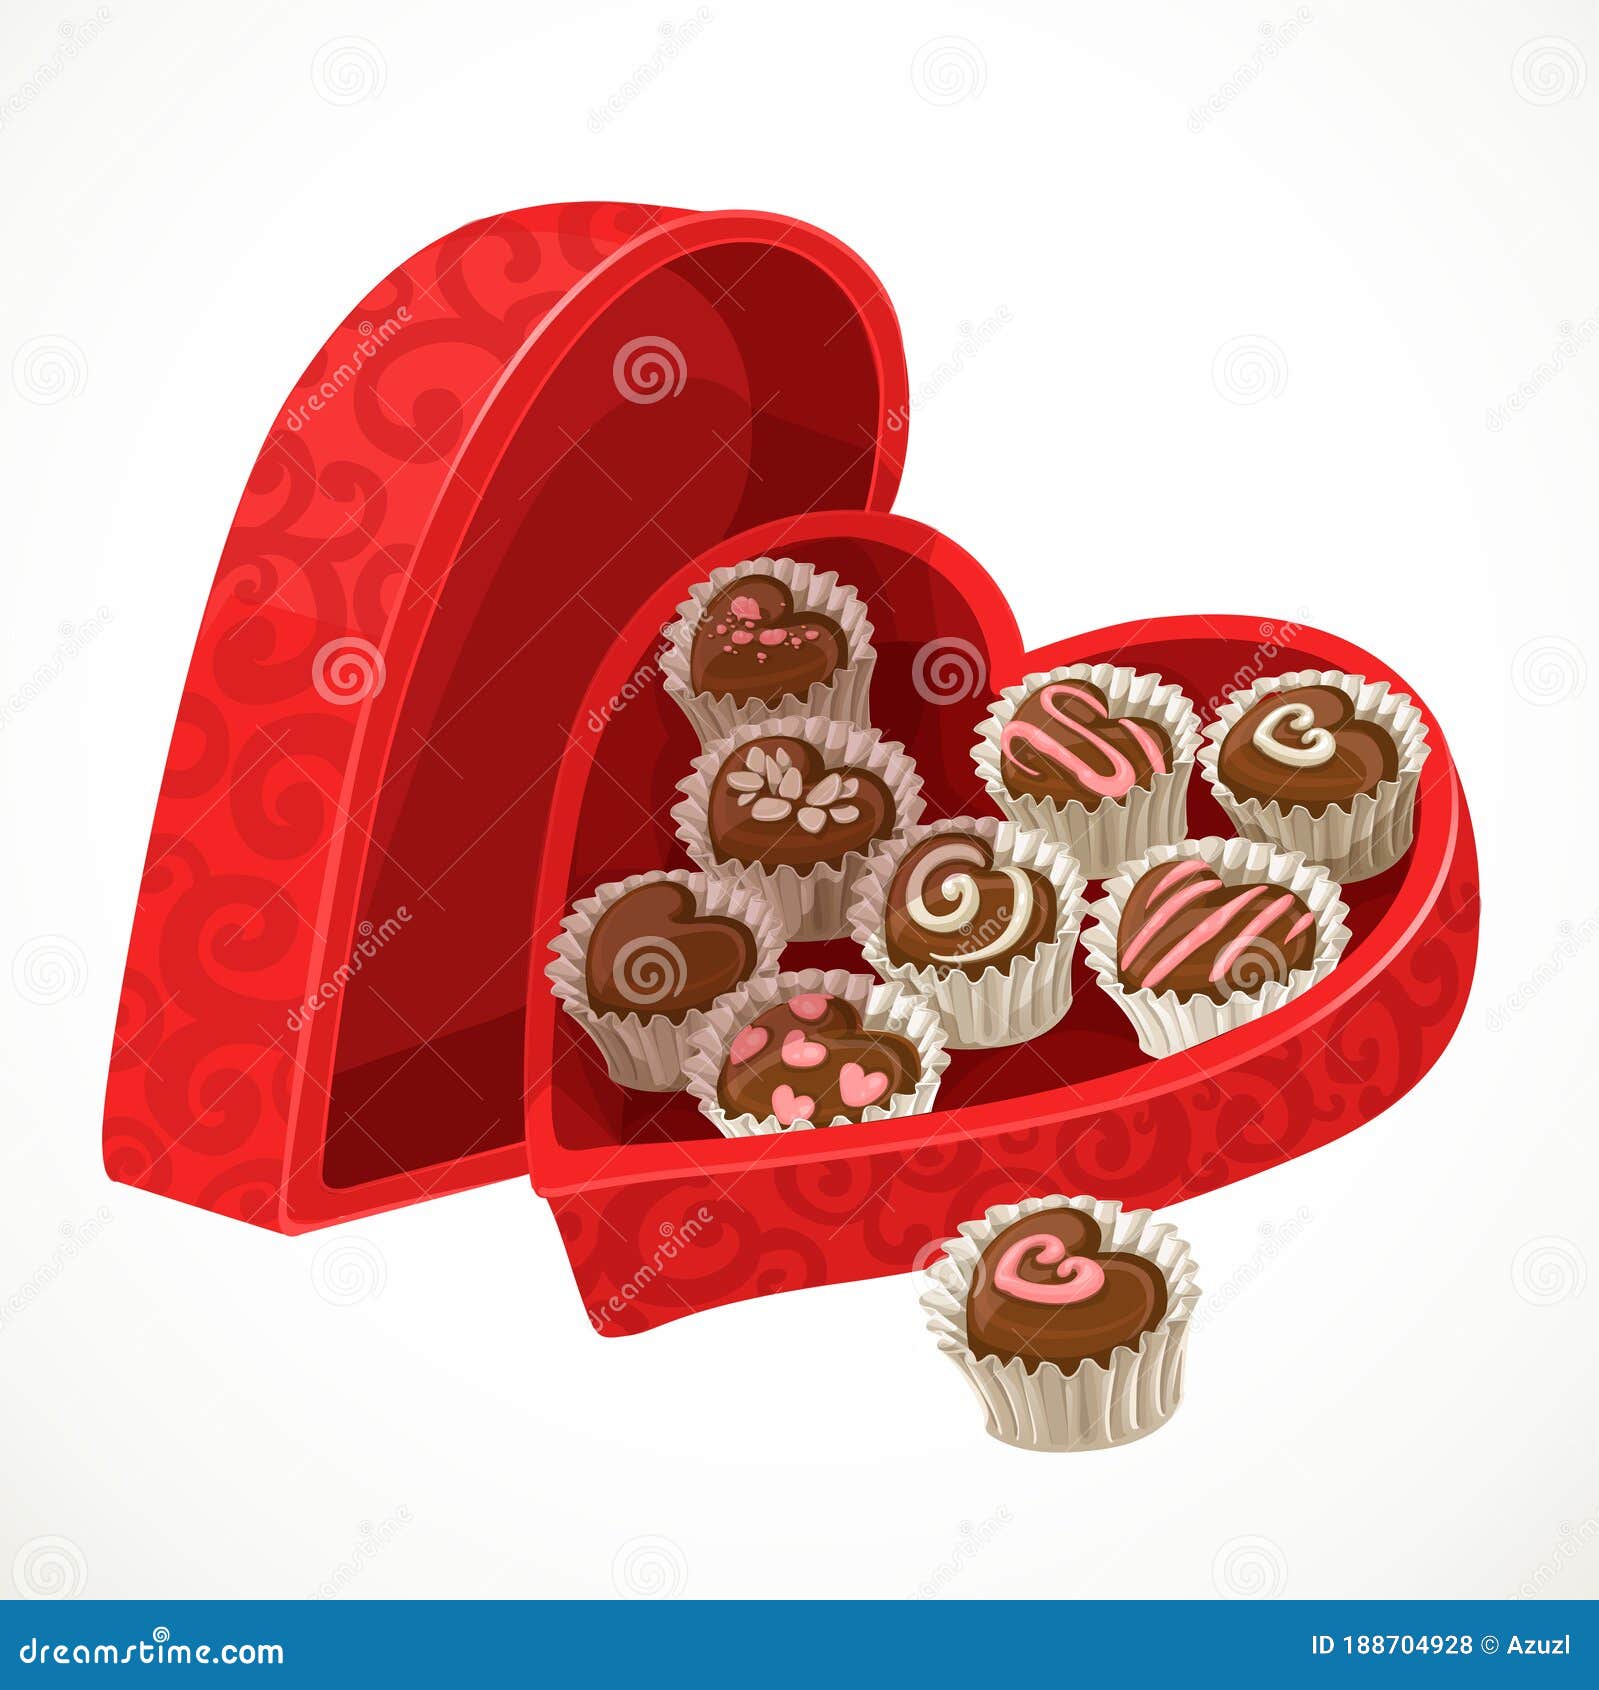 Red Box Of Chocolates In The Form Of Heart Stock Vector - Illustration ...